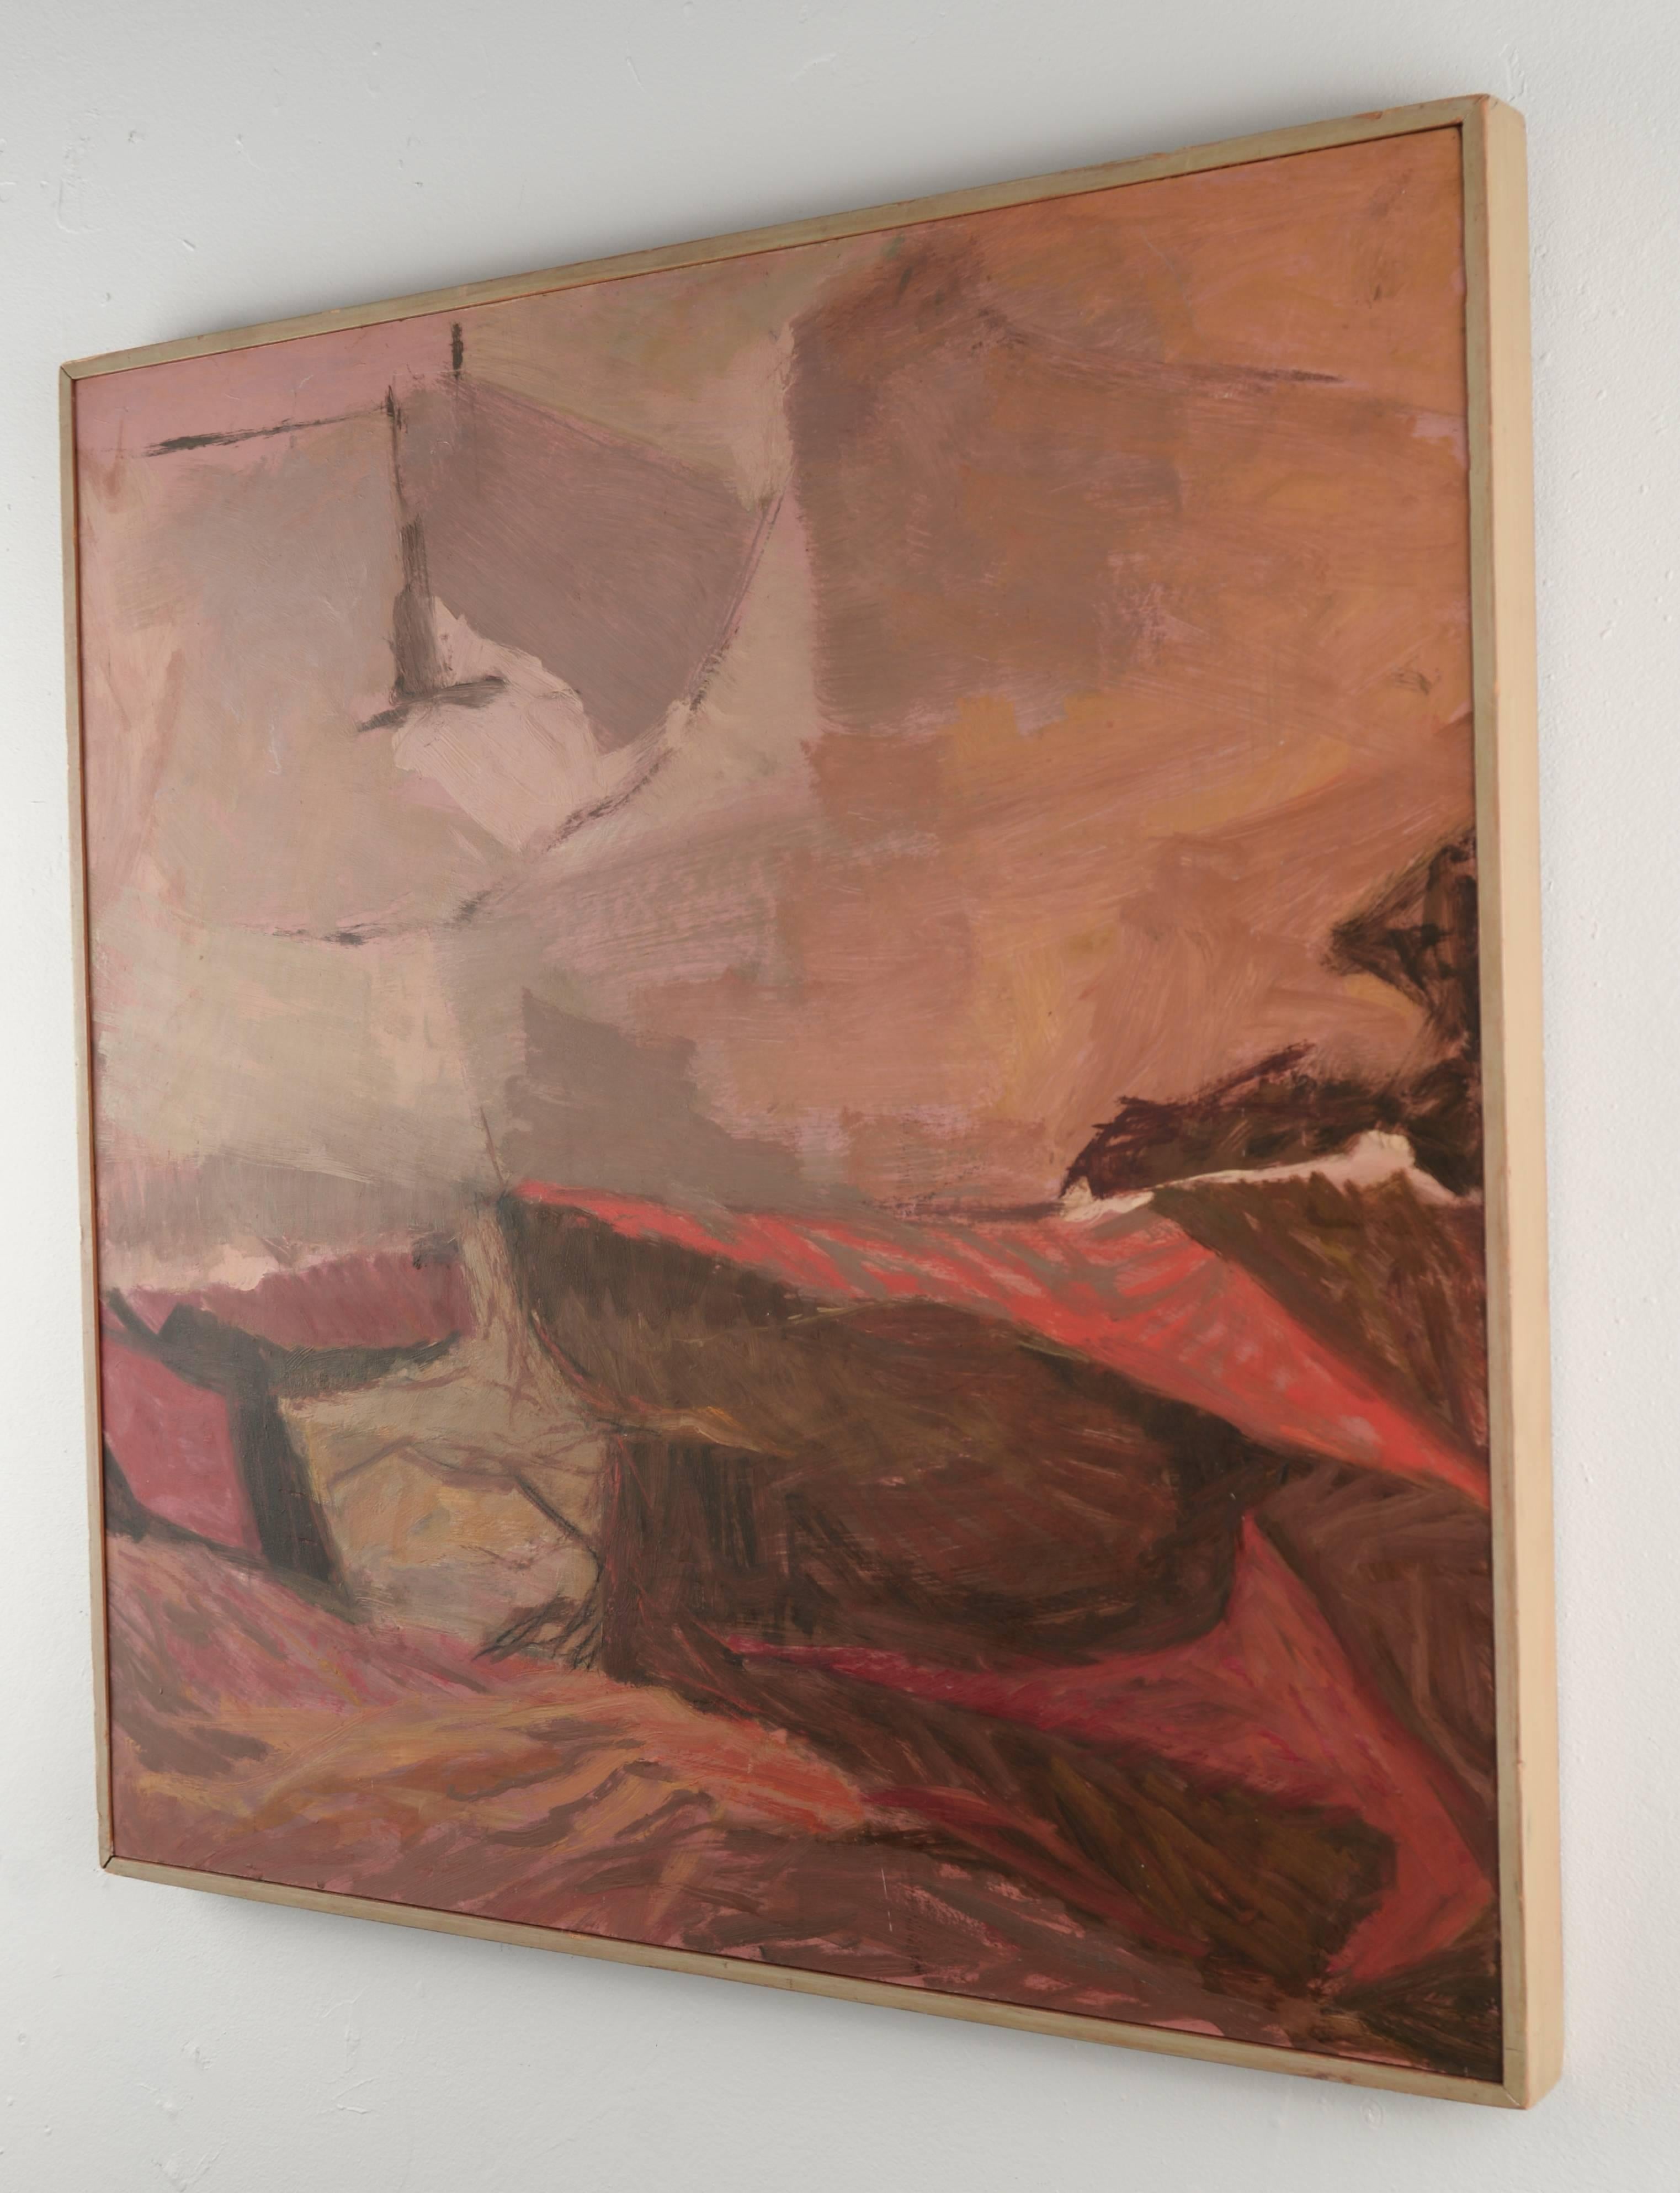 Framed modernist acrylic painting on Masonite in orange and brown tones entitled Rim rock. The artist is R Sterling.